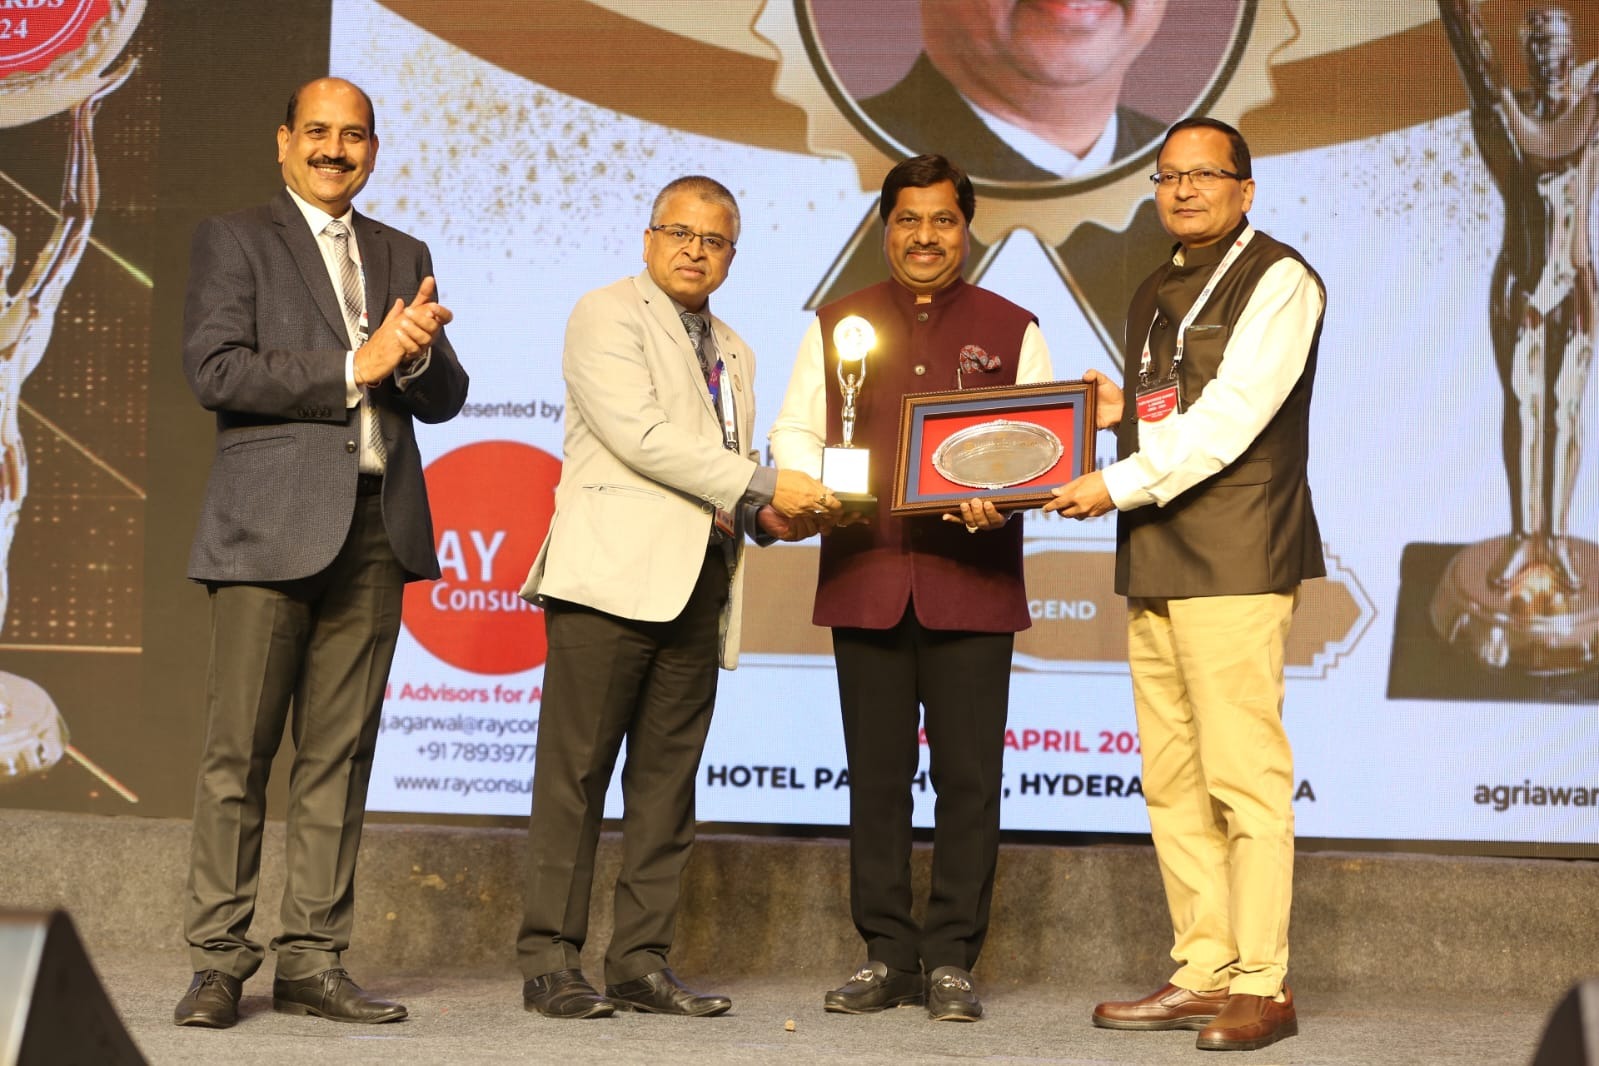 By Dr Sanjay D Patil Honored with Agri Legend Award